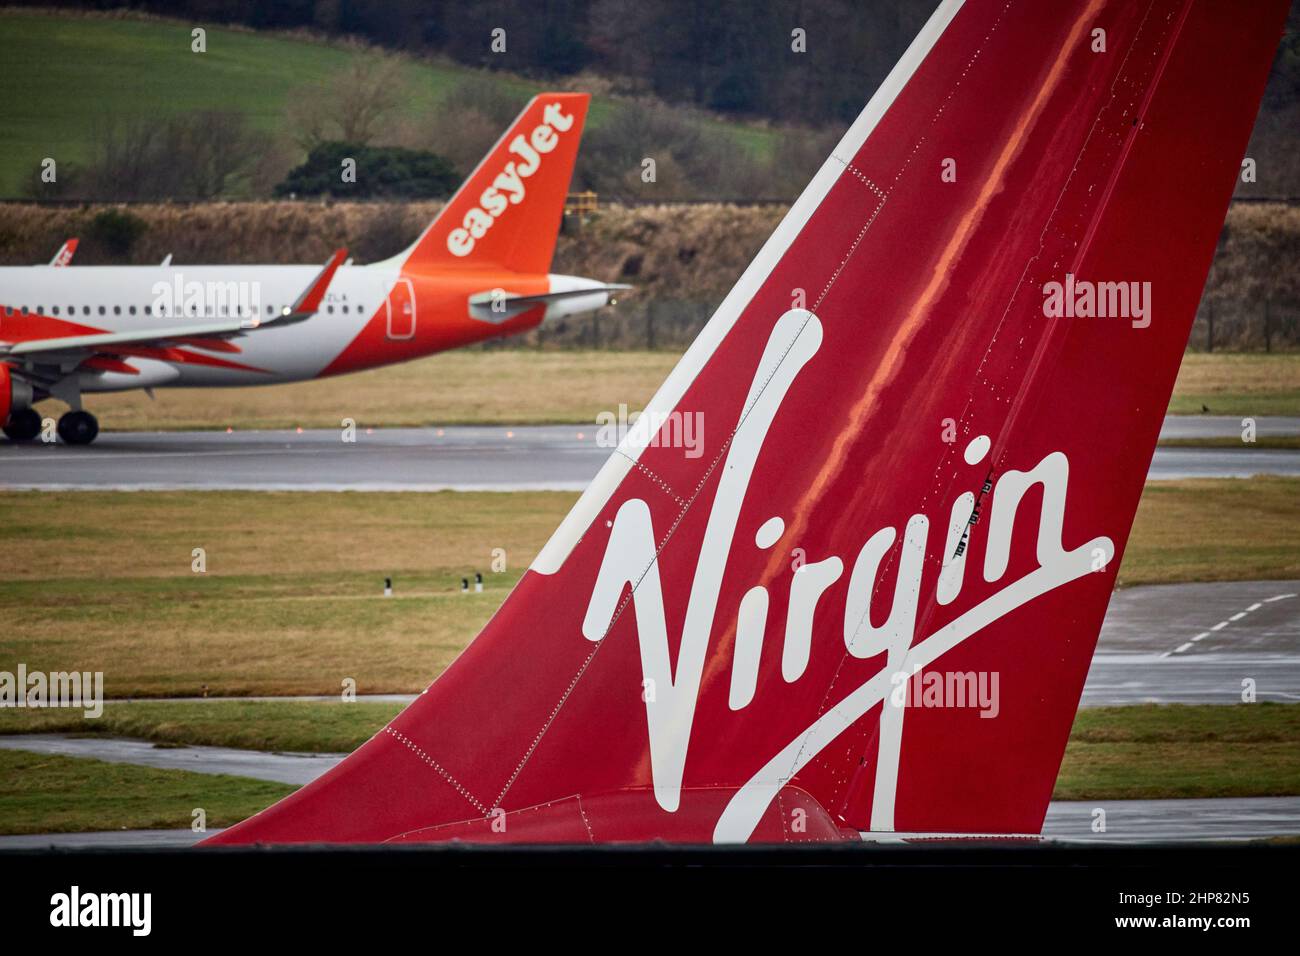 Edinburgh Airport Virgin Atlantic Airbus A330 tail-fin from jet airliner plane named Uptown Girl and Easyjet  G-UZLA. Airbus A320-251N Stock Photo